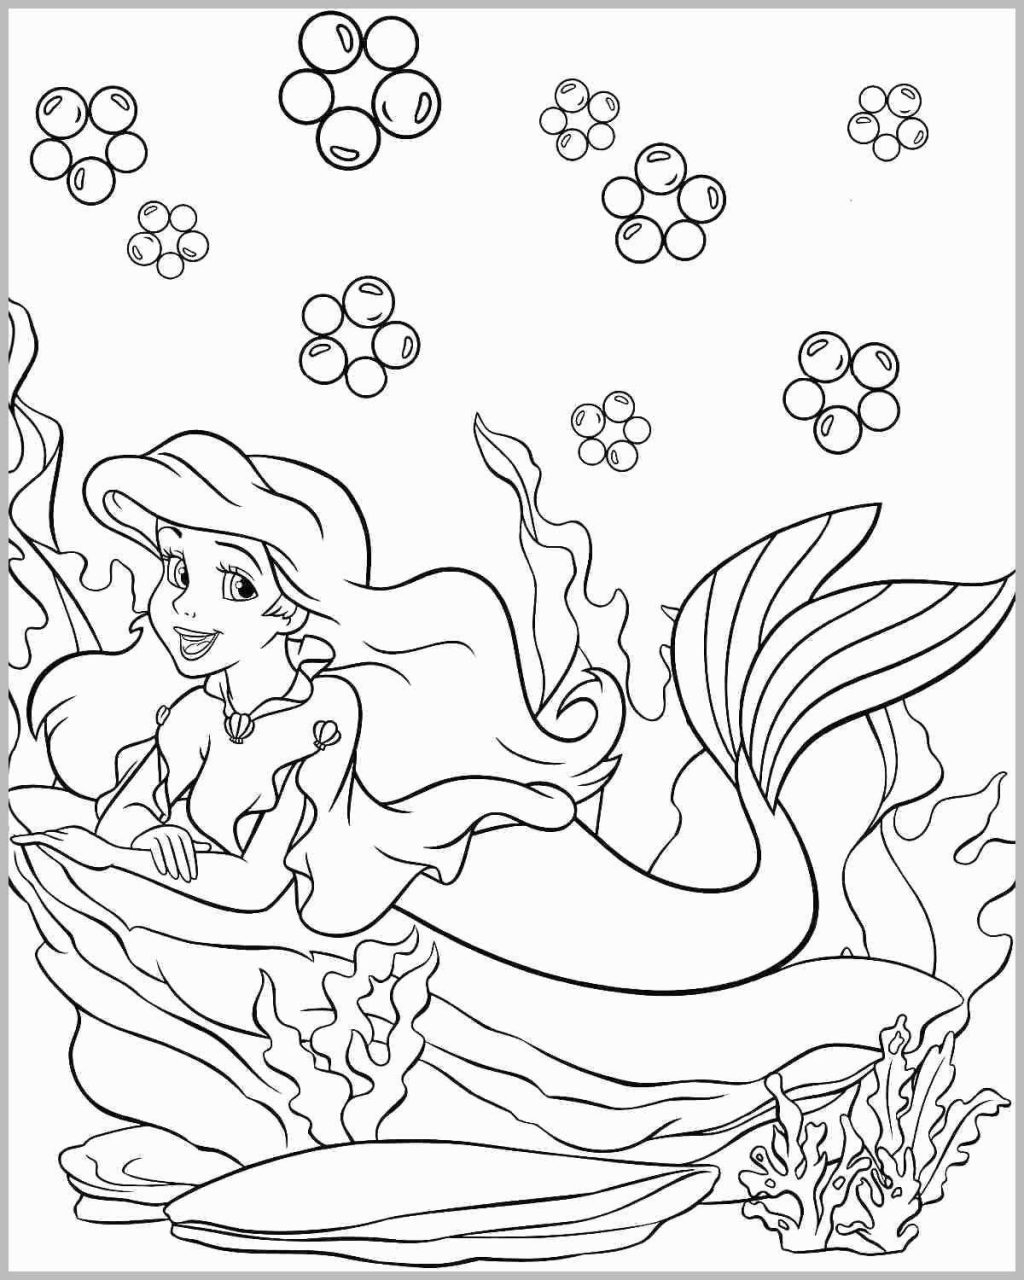 Ariel Printable Coloring Pages Coloring Page Princess Ariel Coloring Pages Admirable Printable